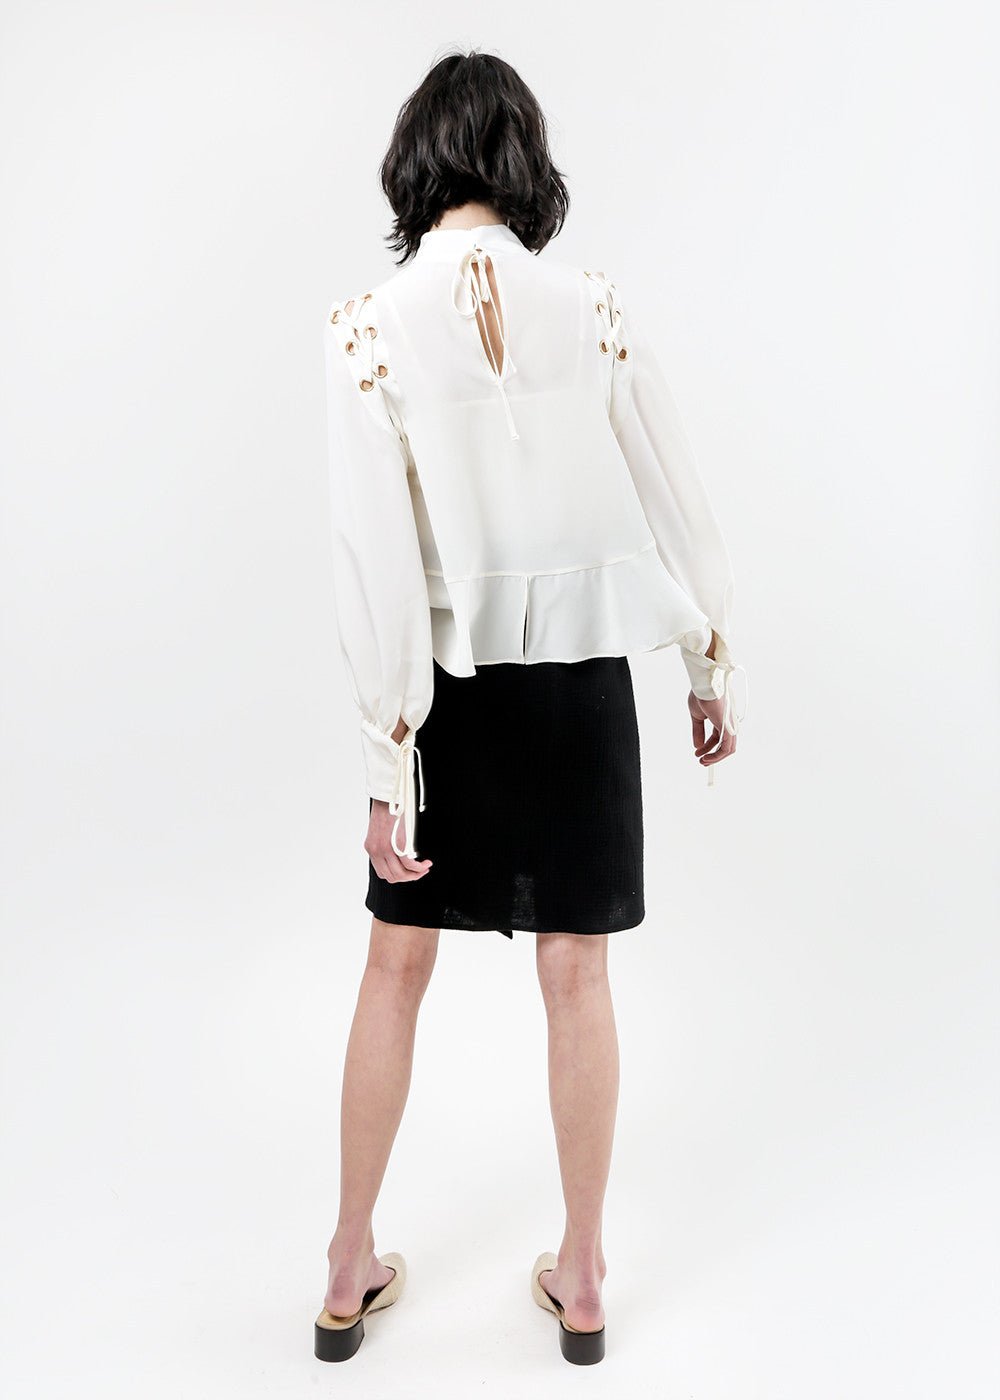 Arcana NYC Eyre Lace-Up Blouse - New Classics Studios Sustainable Ethical Fashion Canada